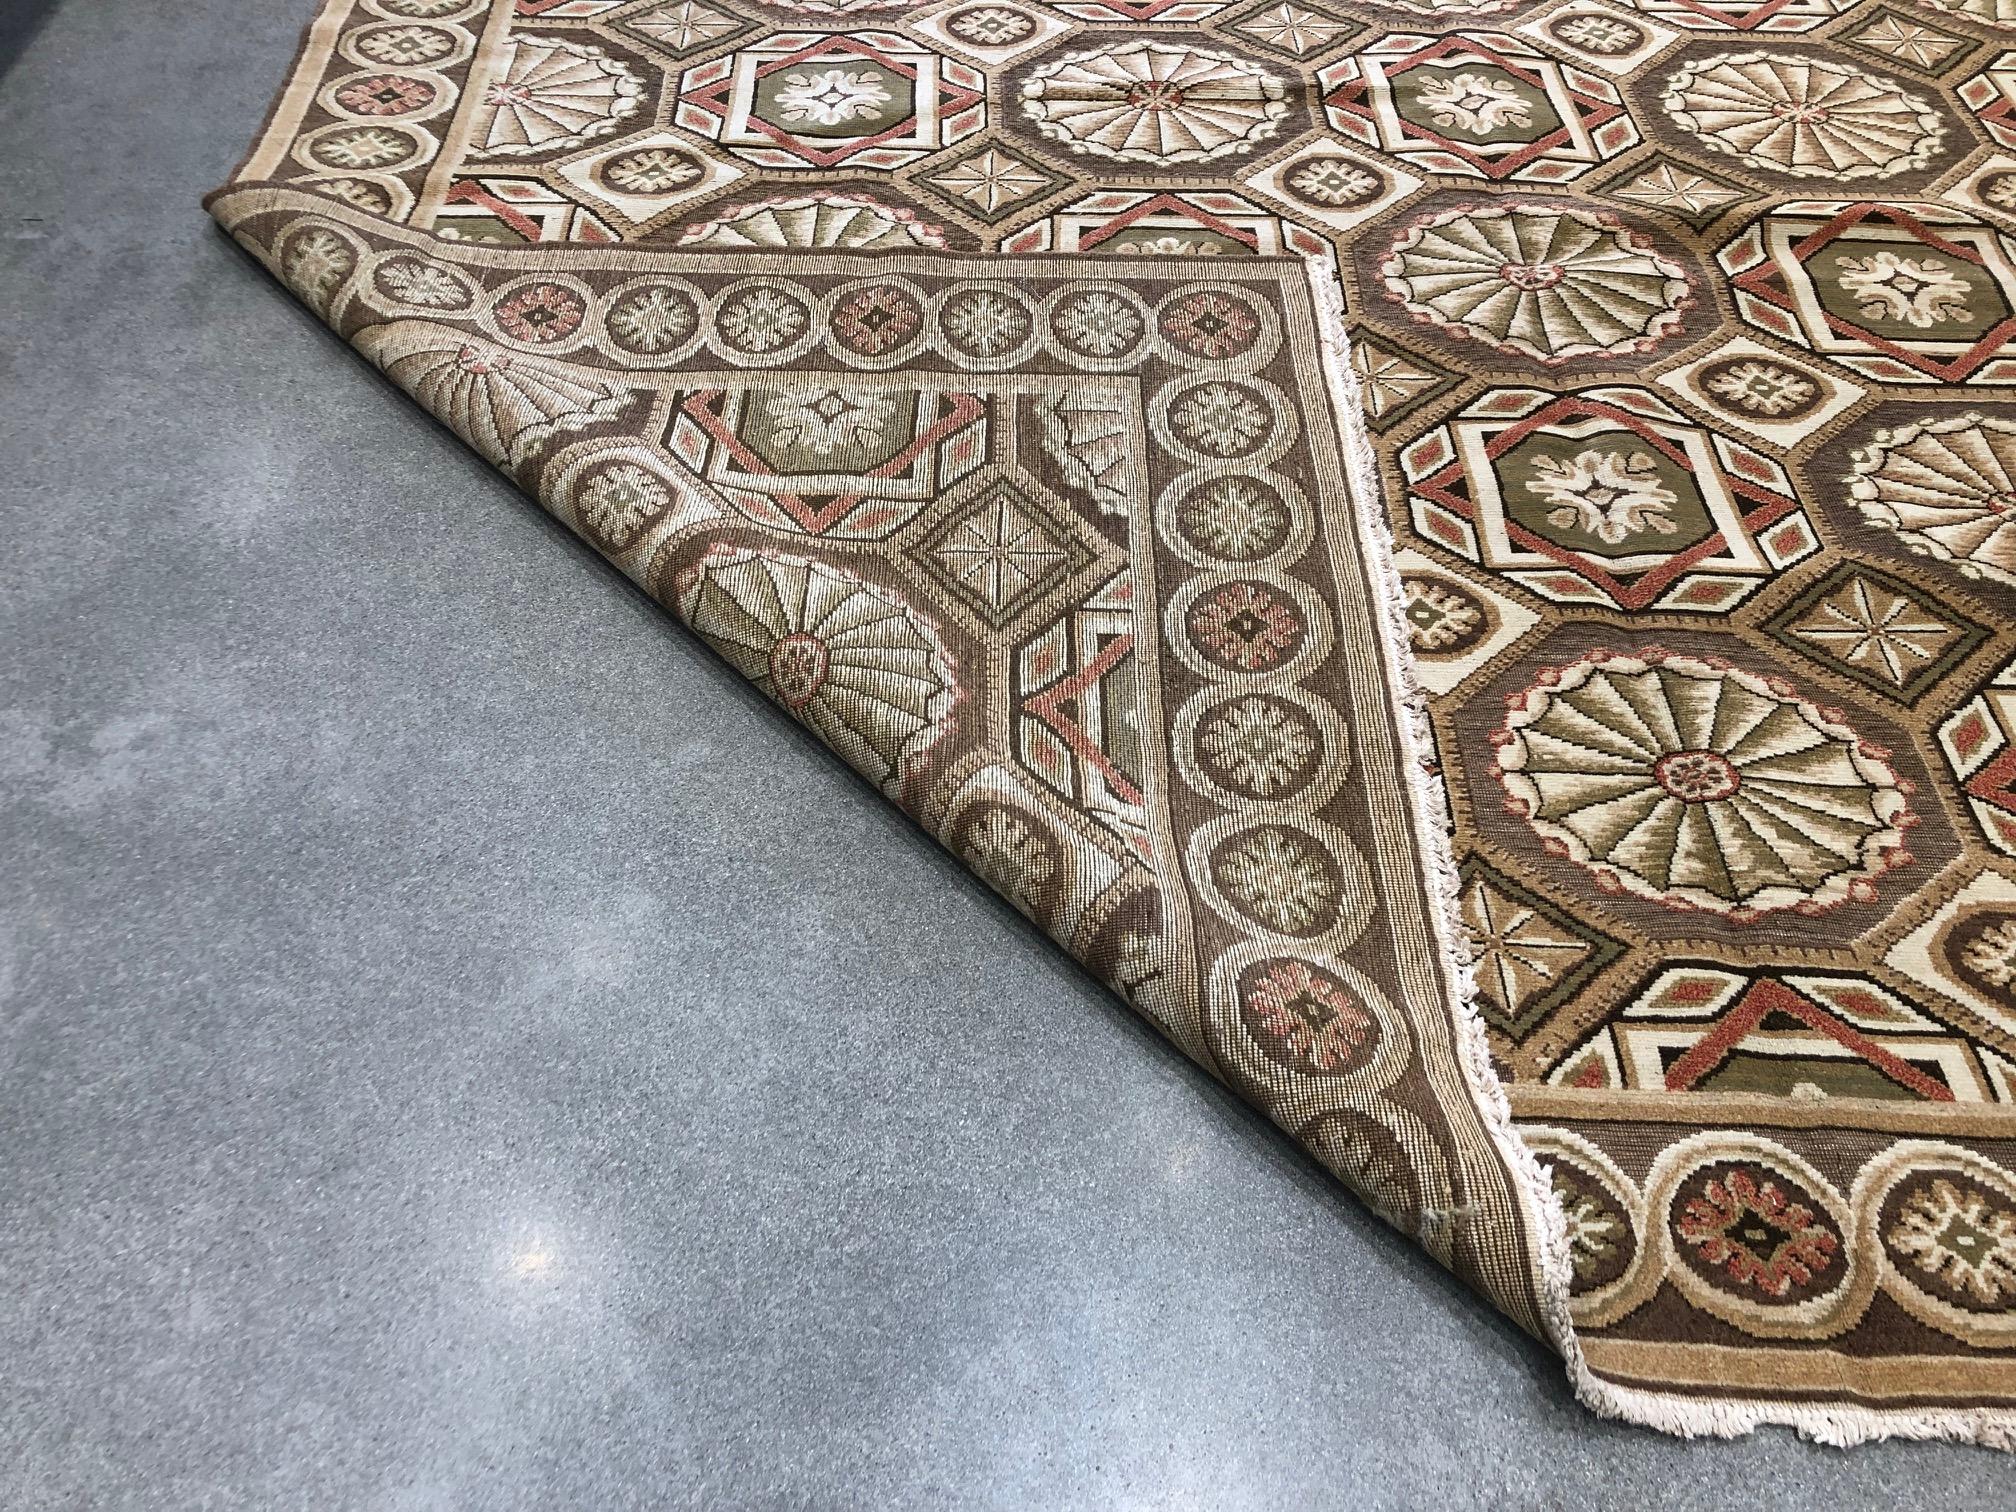 European Design Rug in Brown, Green and Rust In Excellent Condition For Sale In Los Angeles, CA